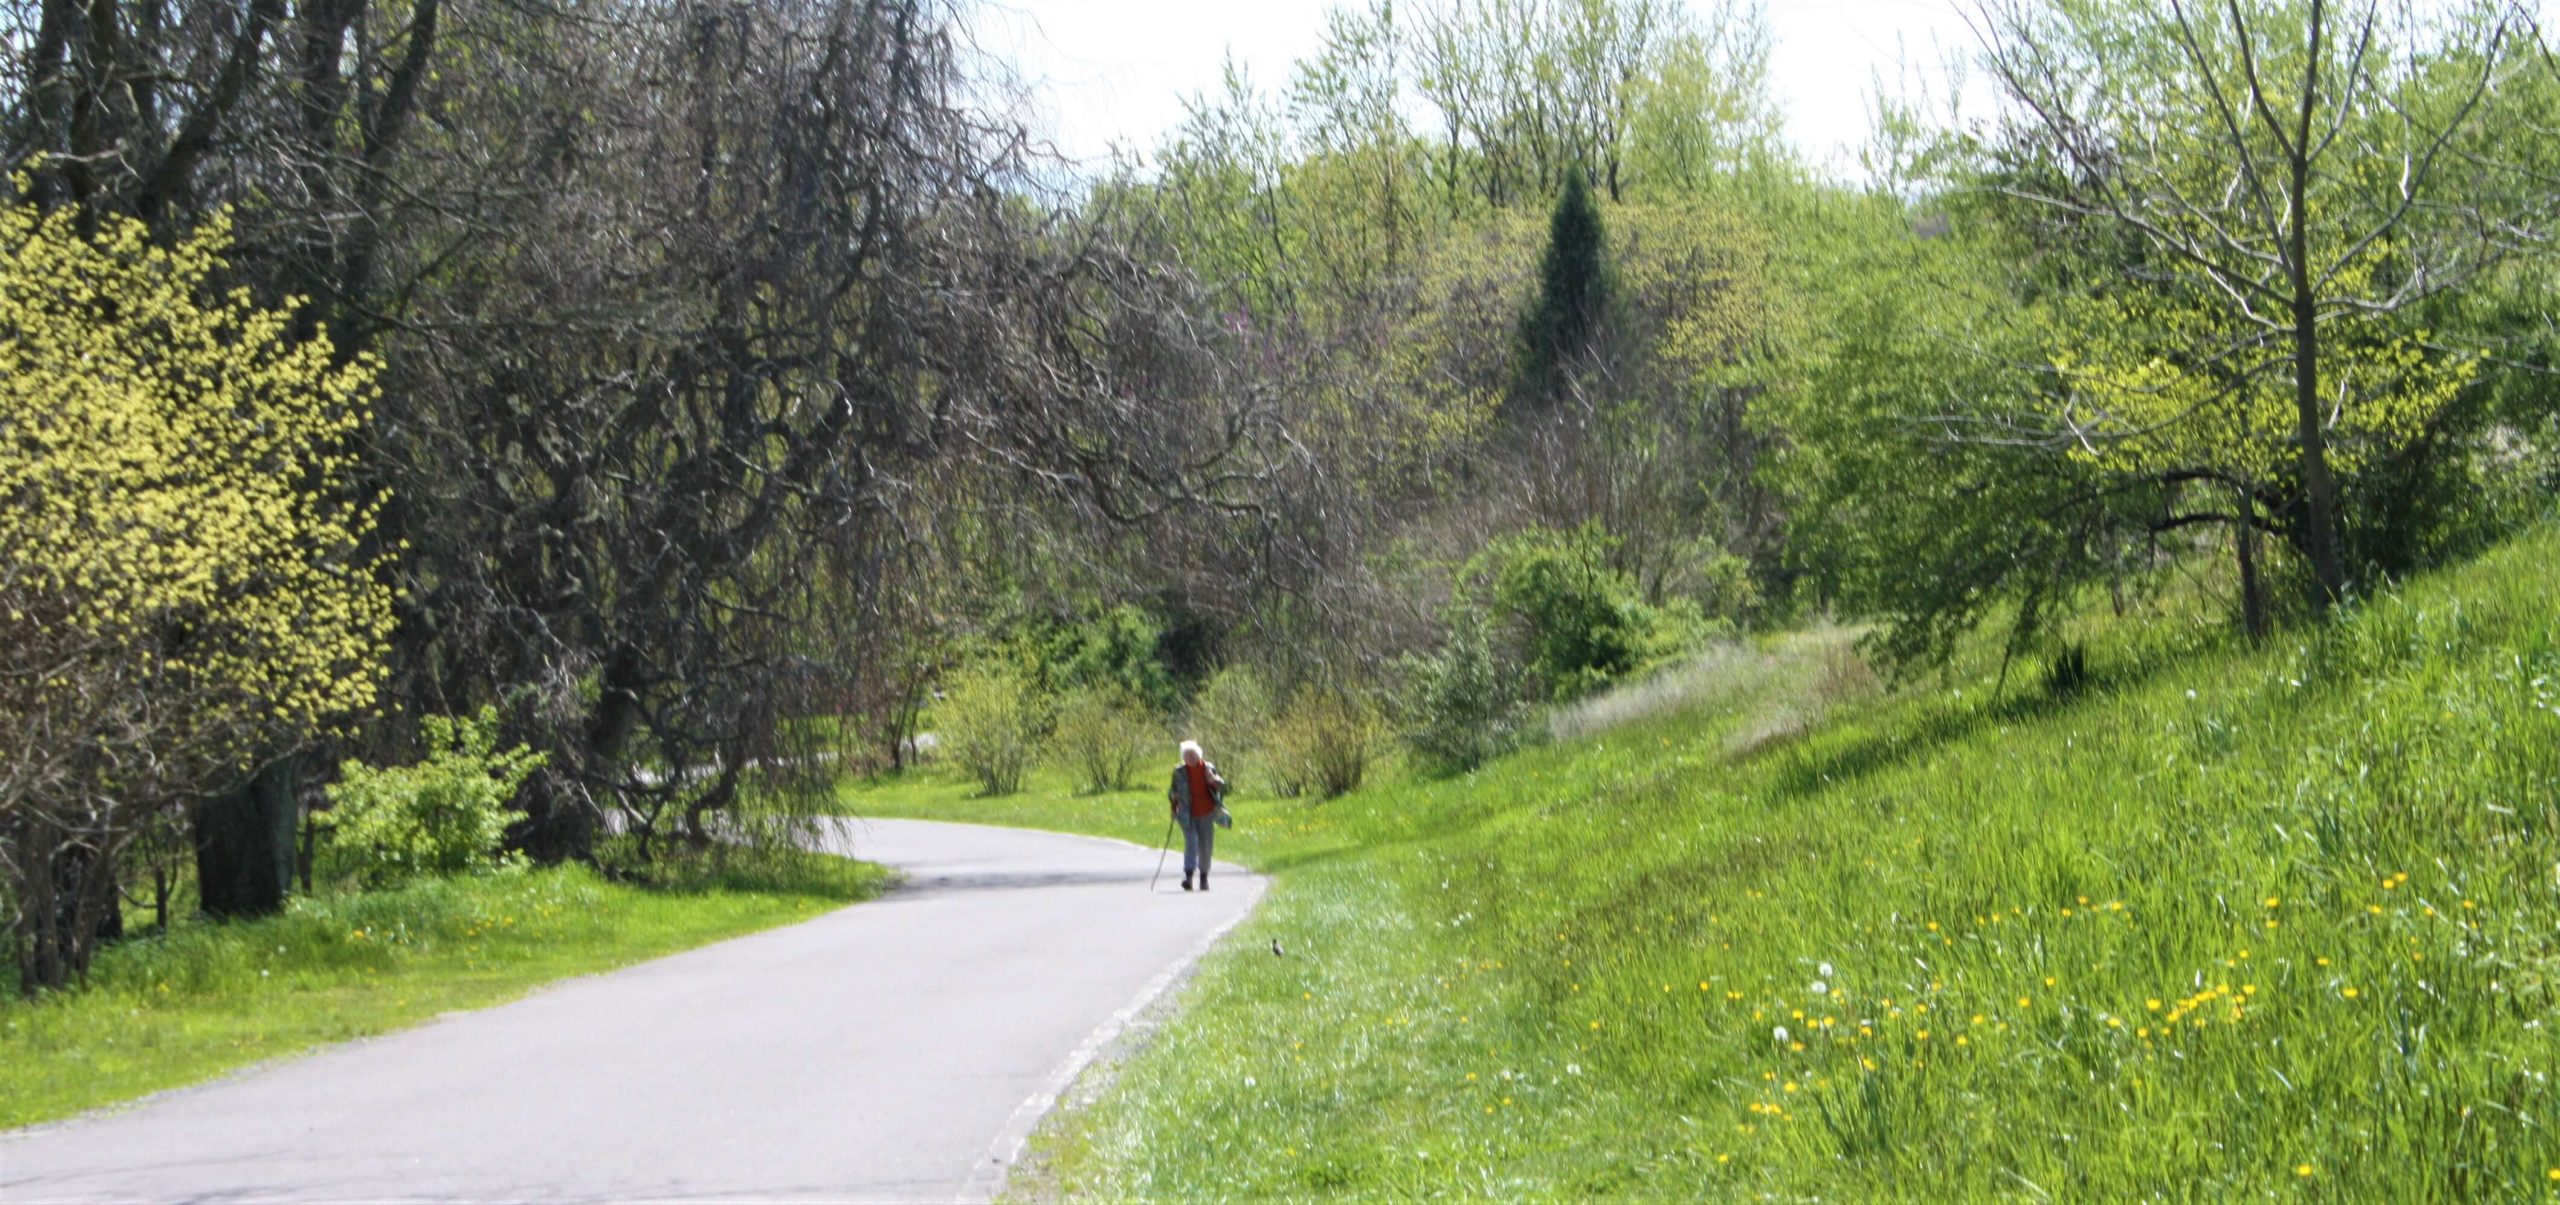 Helen Zipperlen, 92-year-old co-founder of Camphill Village Kimberton Hills, walking up the road on a beautiful spring day